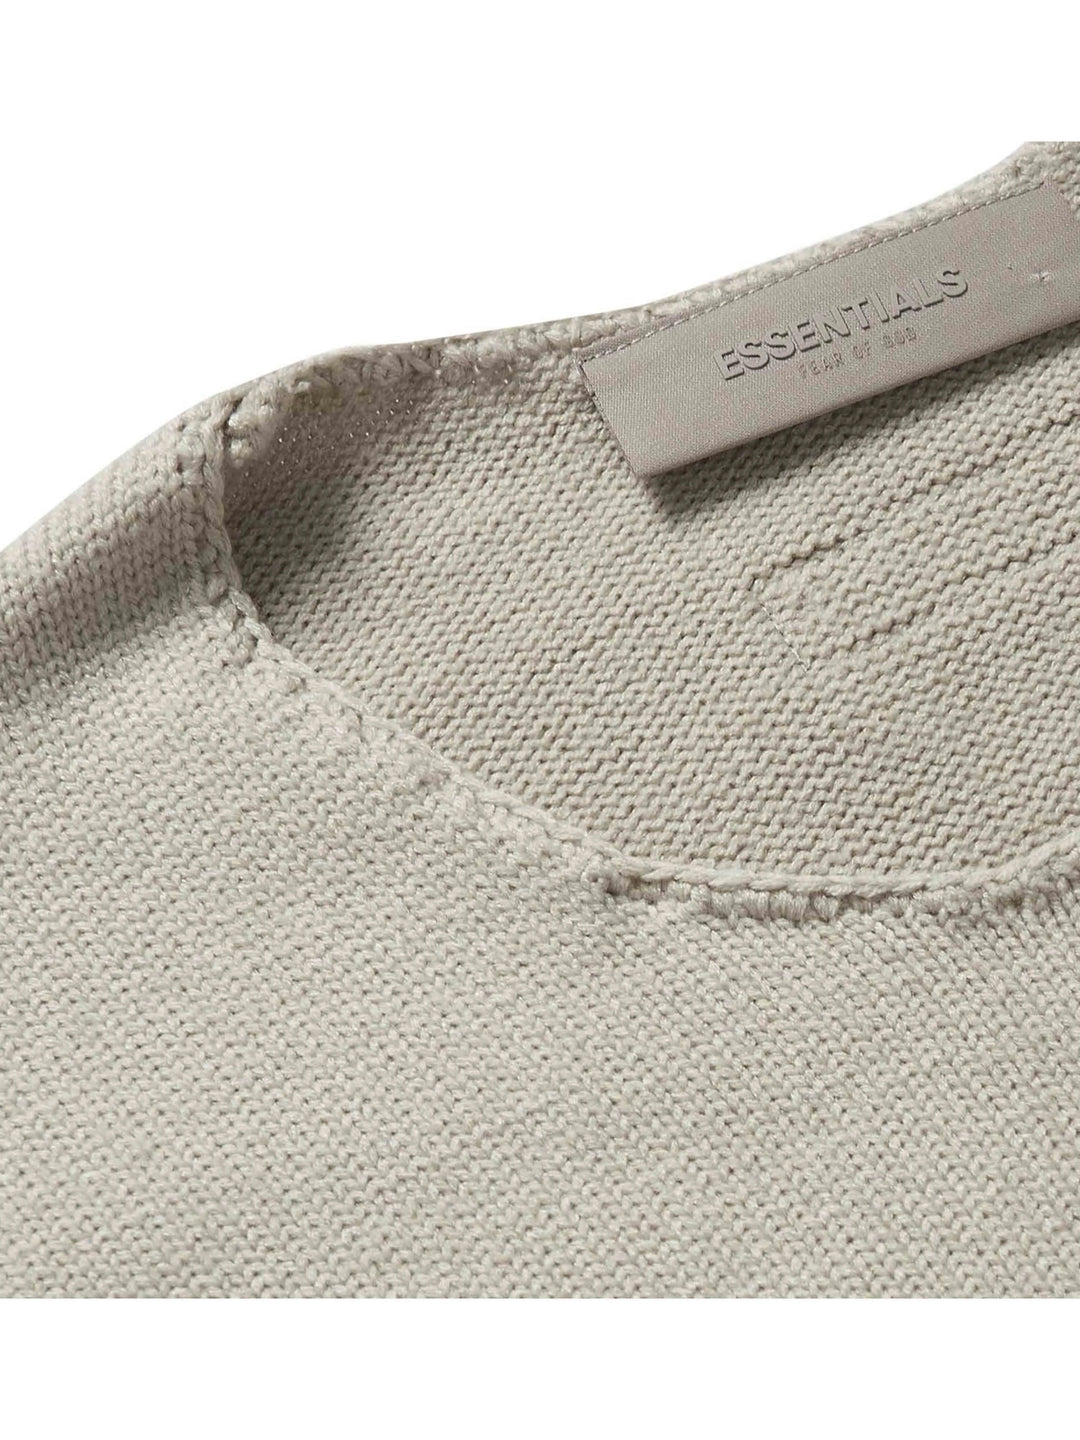 Fear of God Essentials 1977 Raw Edge Sweater Wheat [SS22] Prior